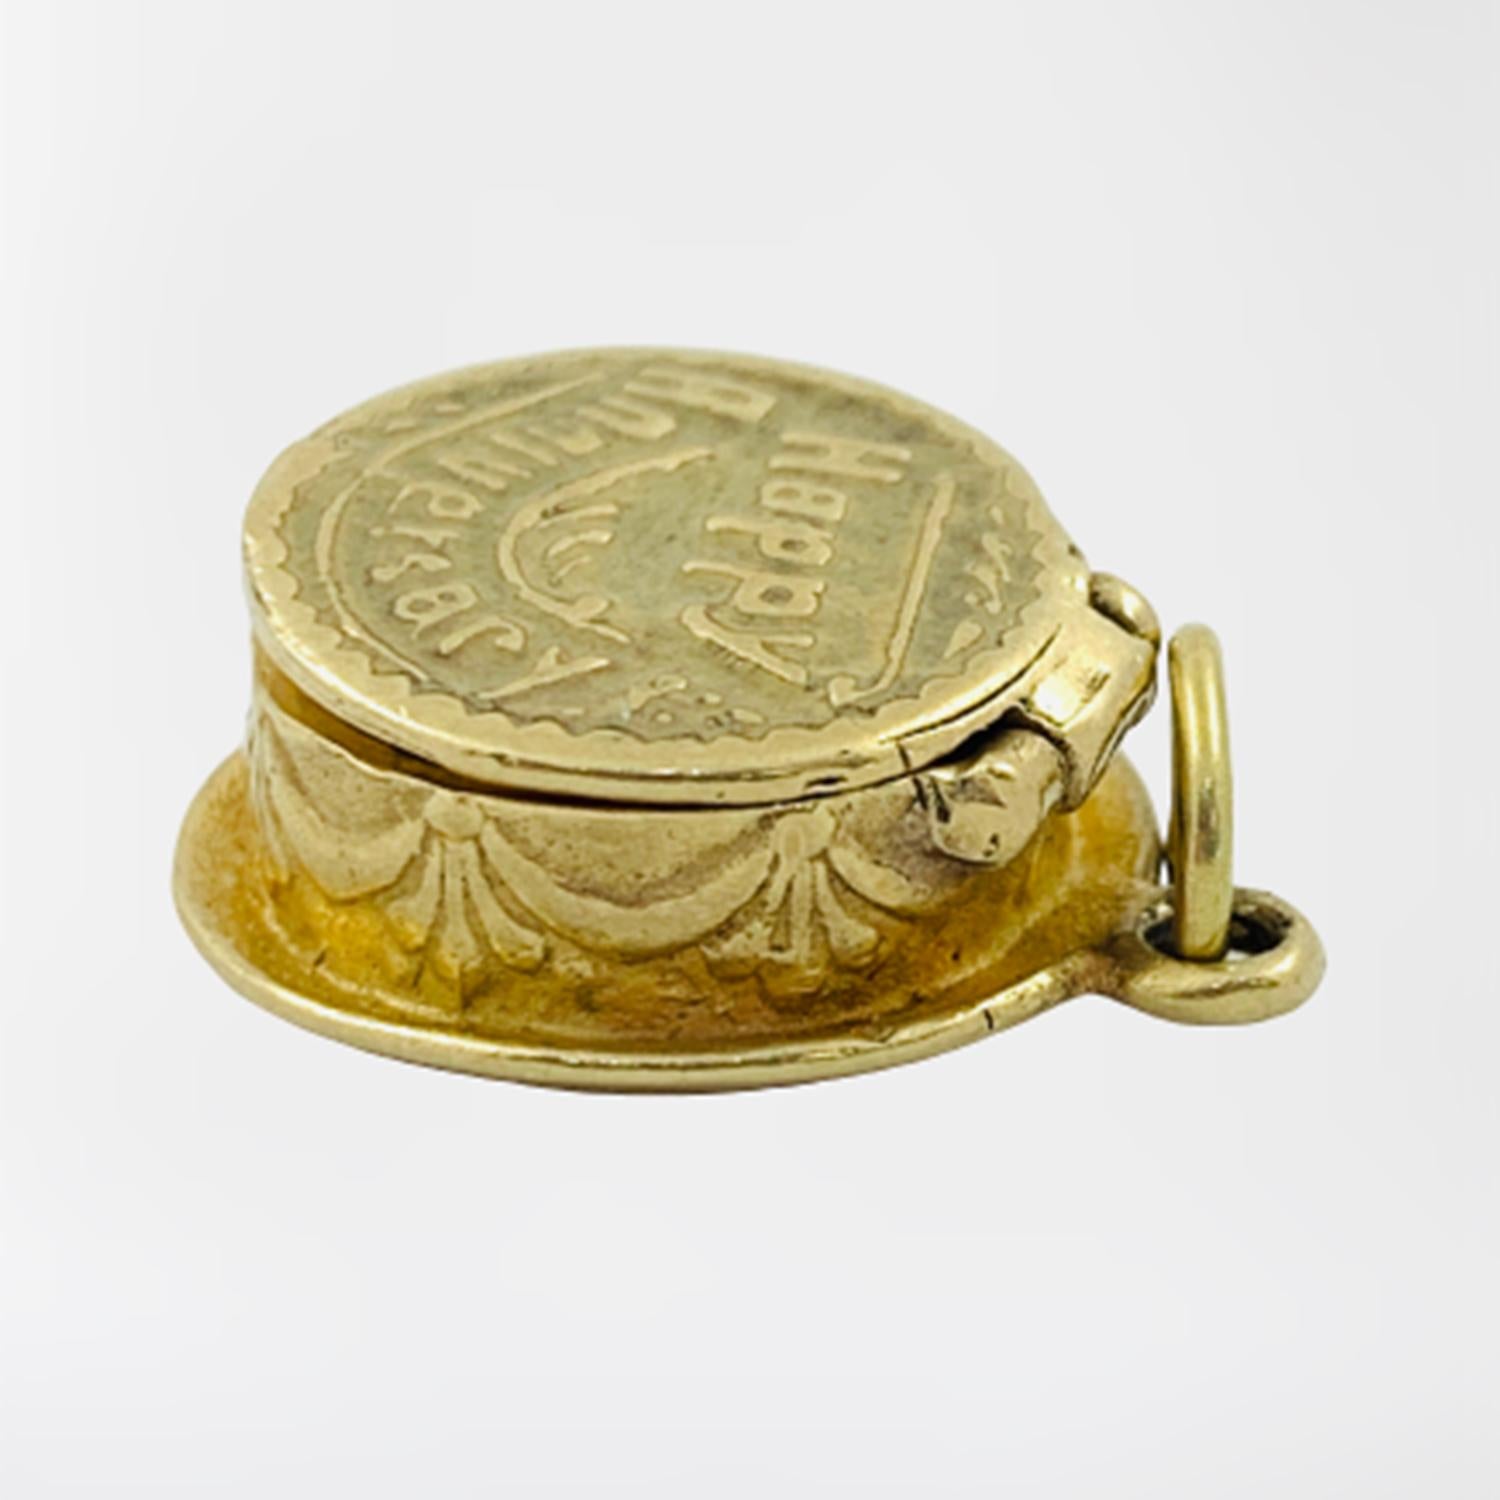 Vintage Anniversary Cake Charm circa 1930-40's

Crafted of solid 14K yellow gold, this cake shaped charm opens to reveal a little candle on the inside. The outside of the cake features gorgeous engraved patterns and unique touches that make the cake